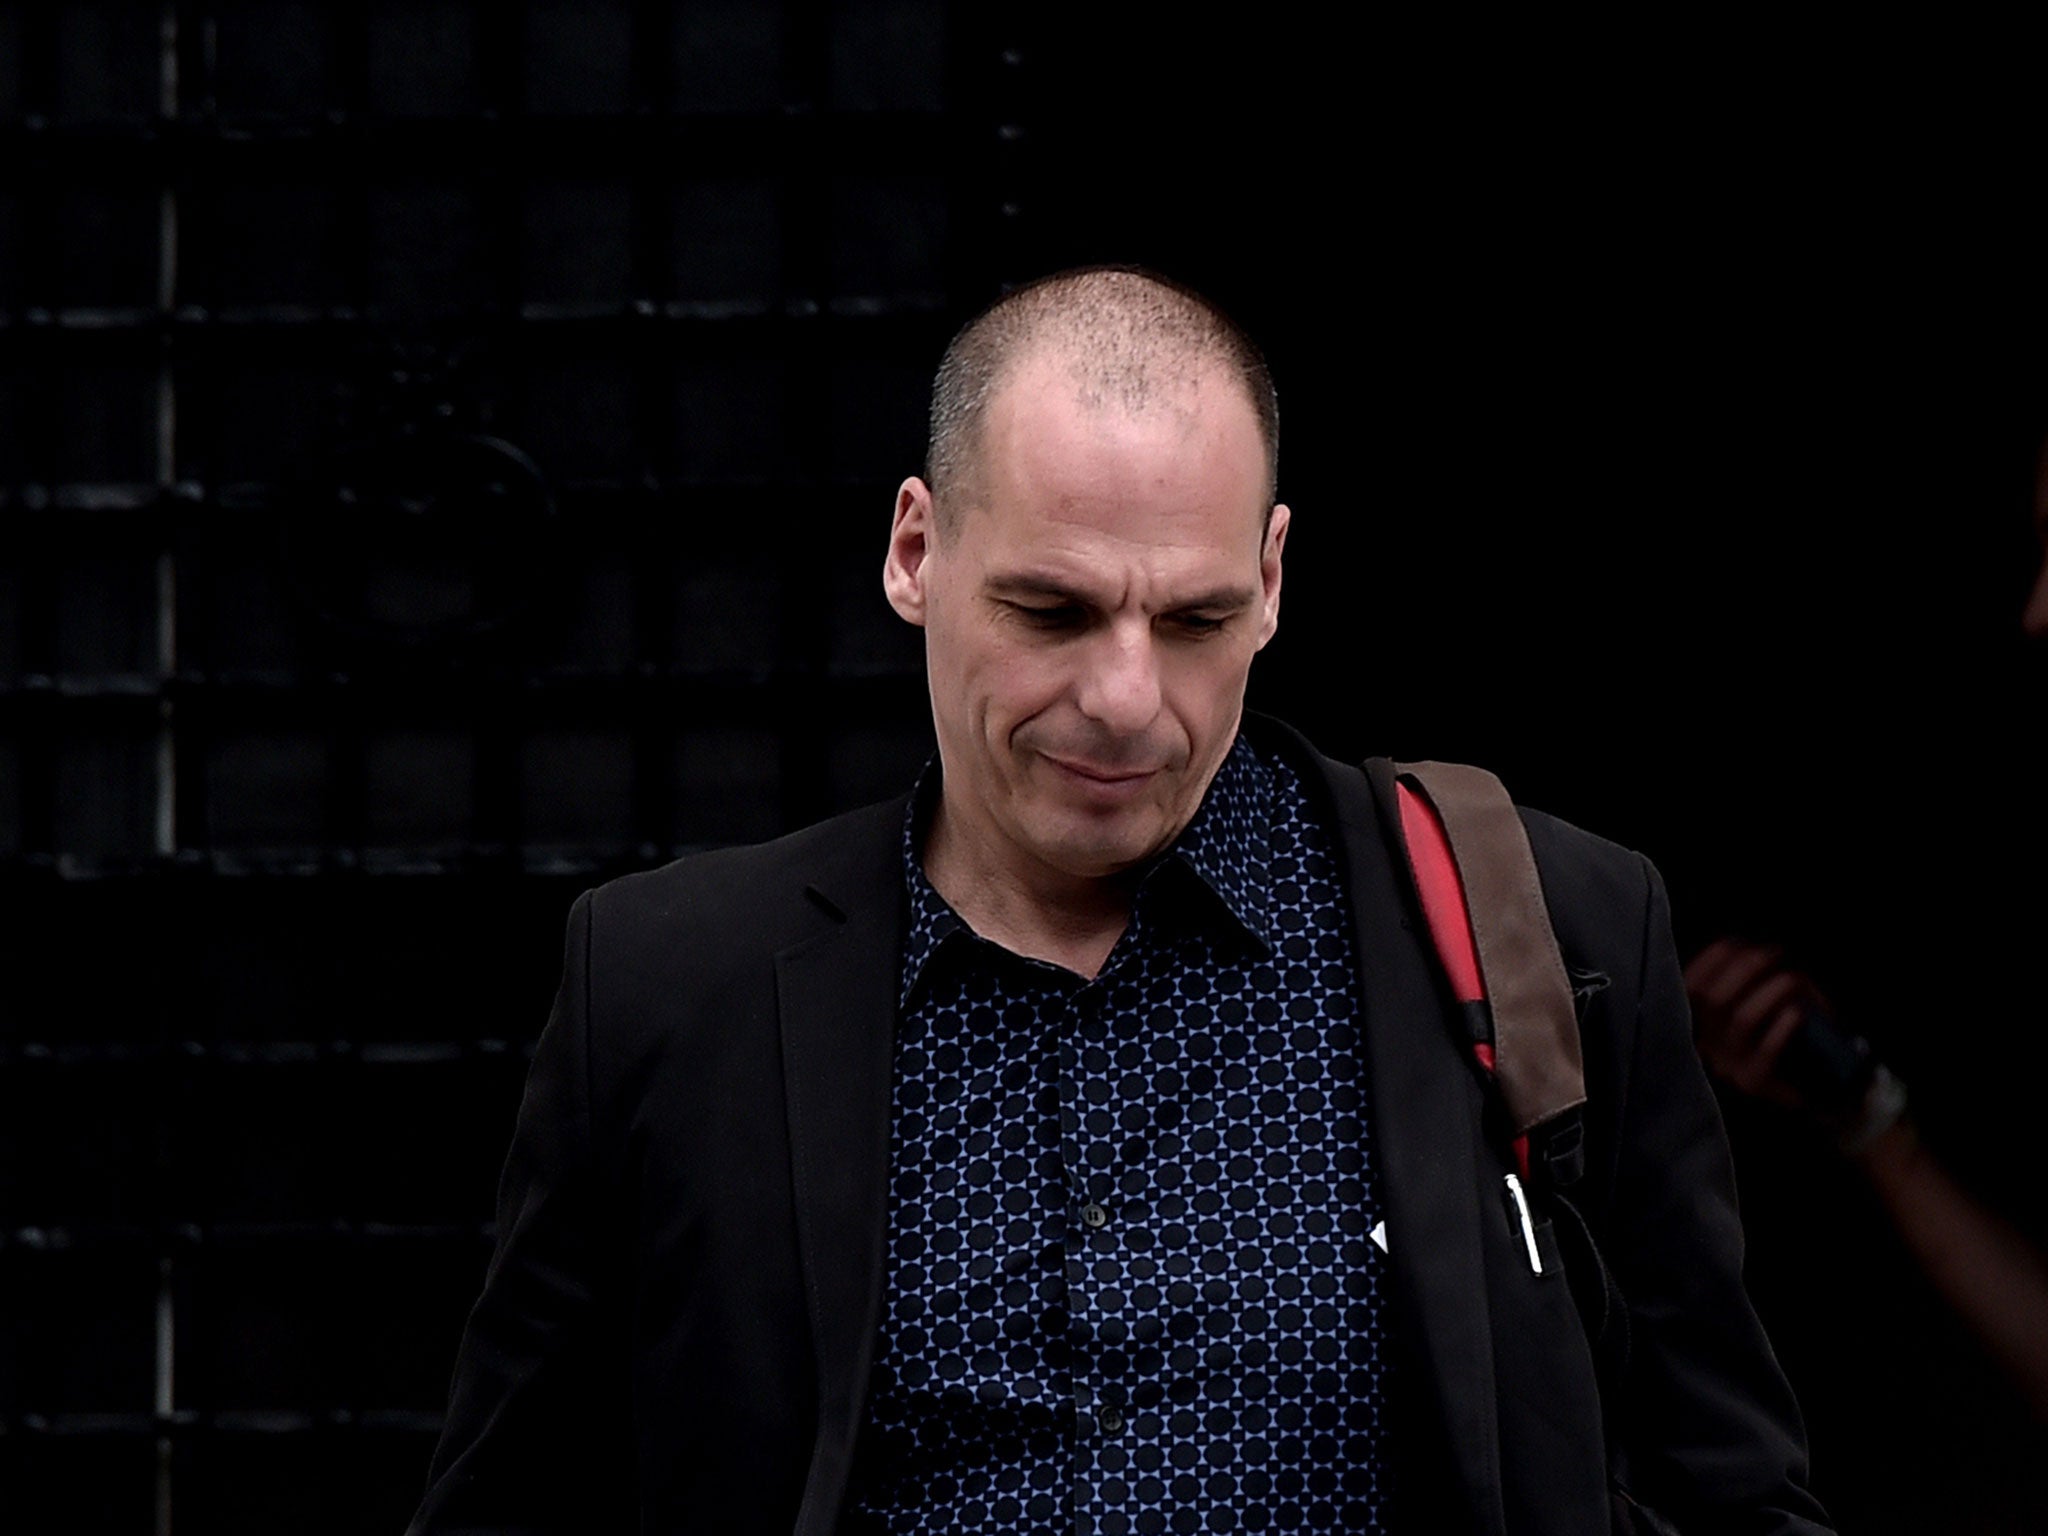 The Greek finance minister Yanis Varoufakis has said he 'will resign' if Greece votes yes to lenders' proposals in the Sunday referendum